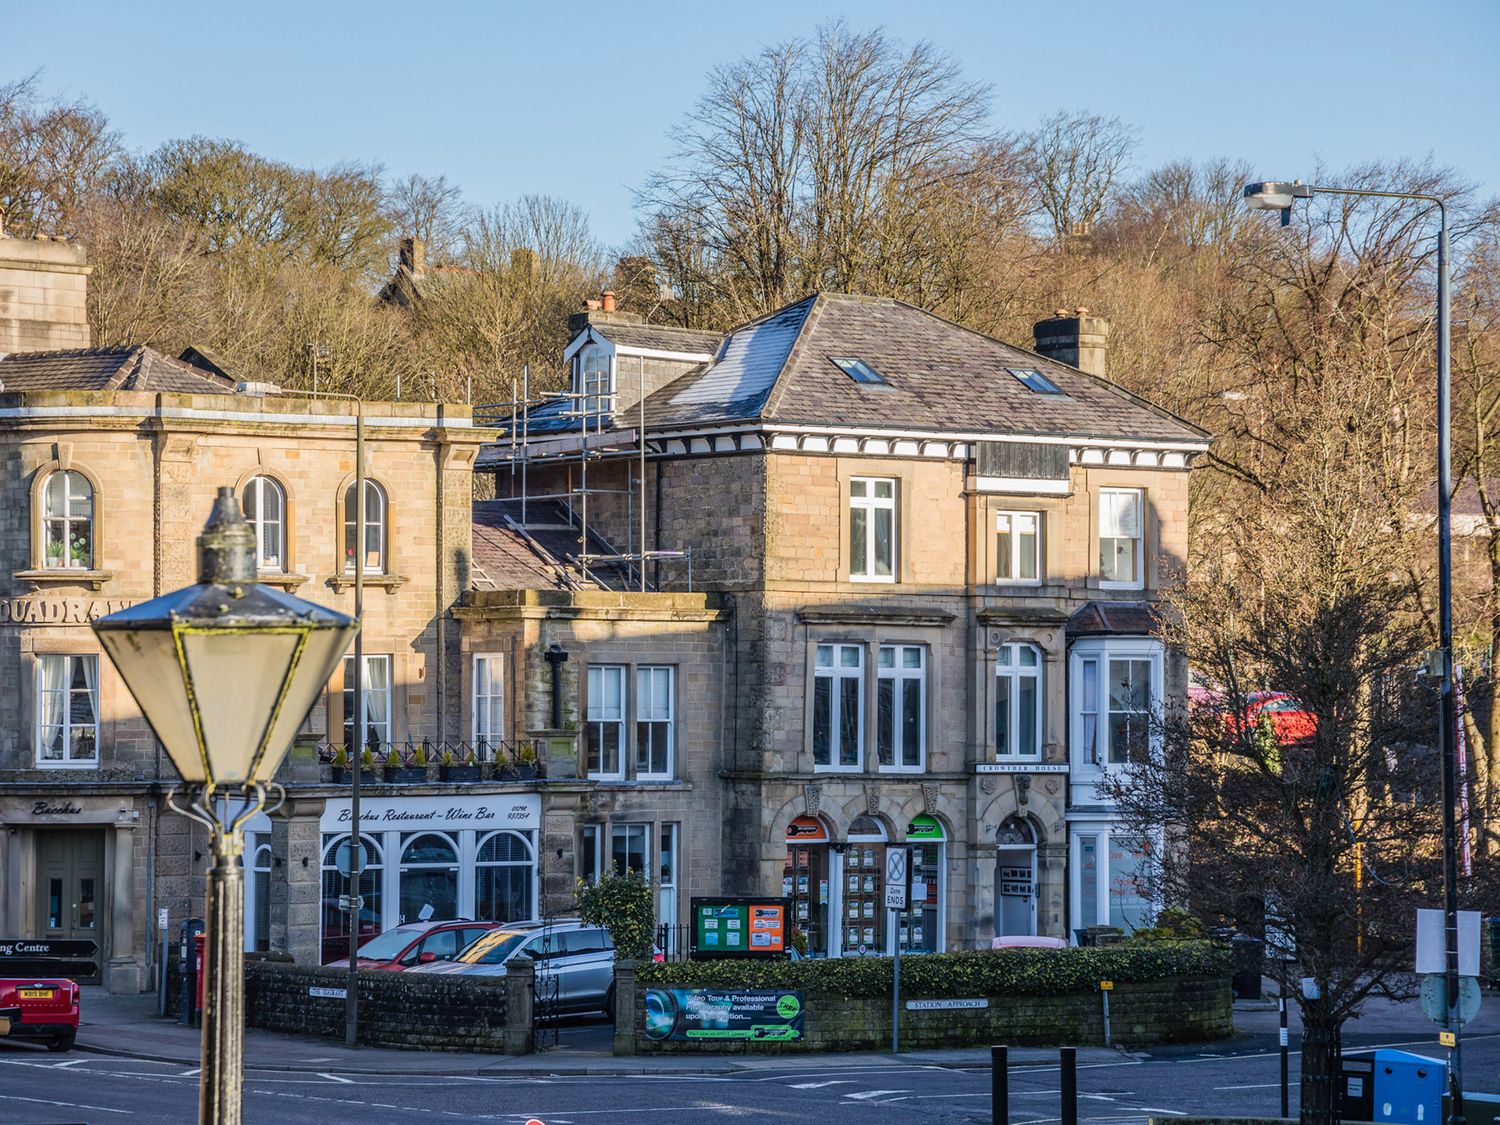 The Rooftop, Buxton, Derbyshire